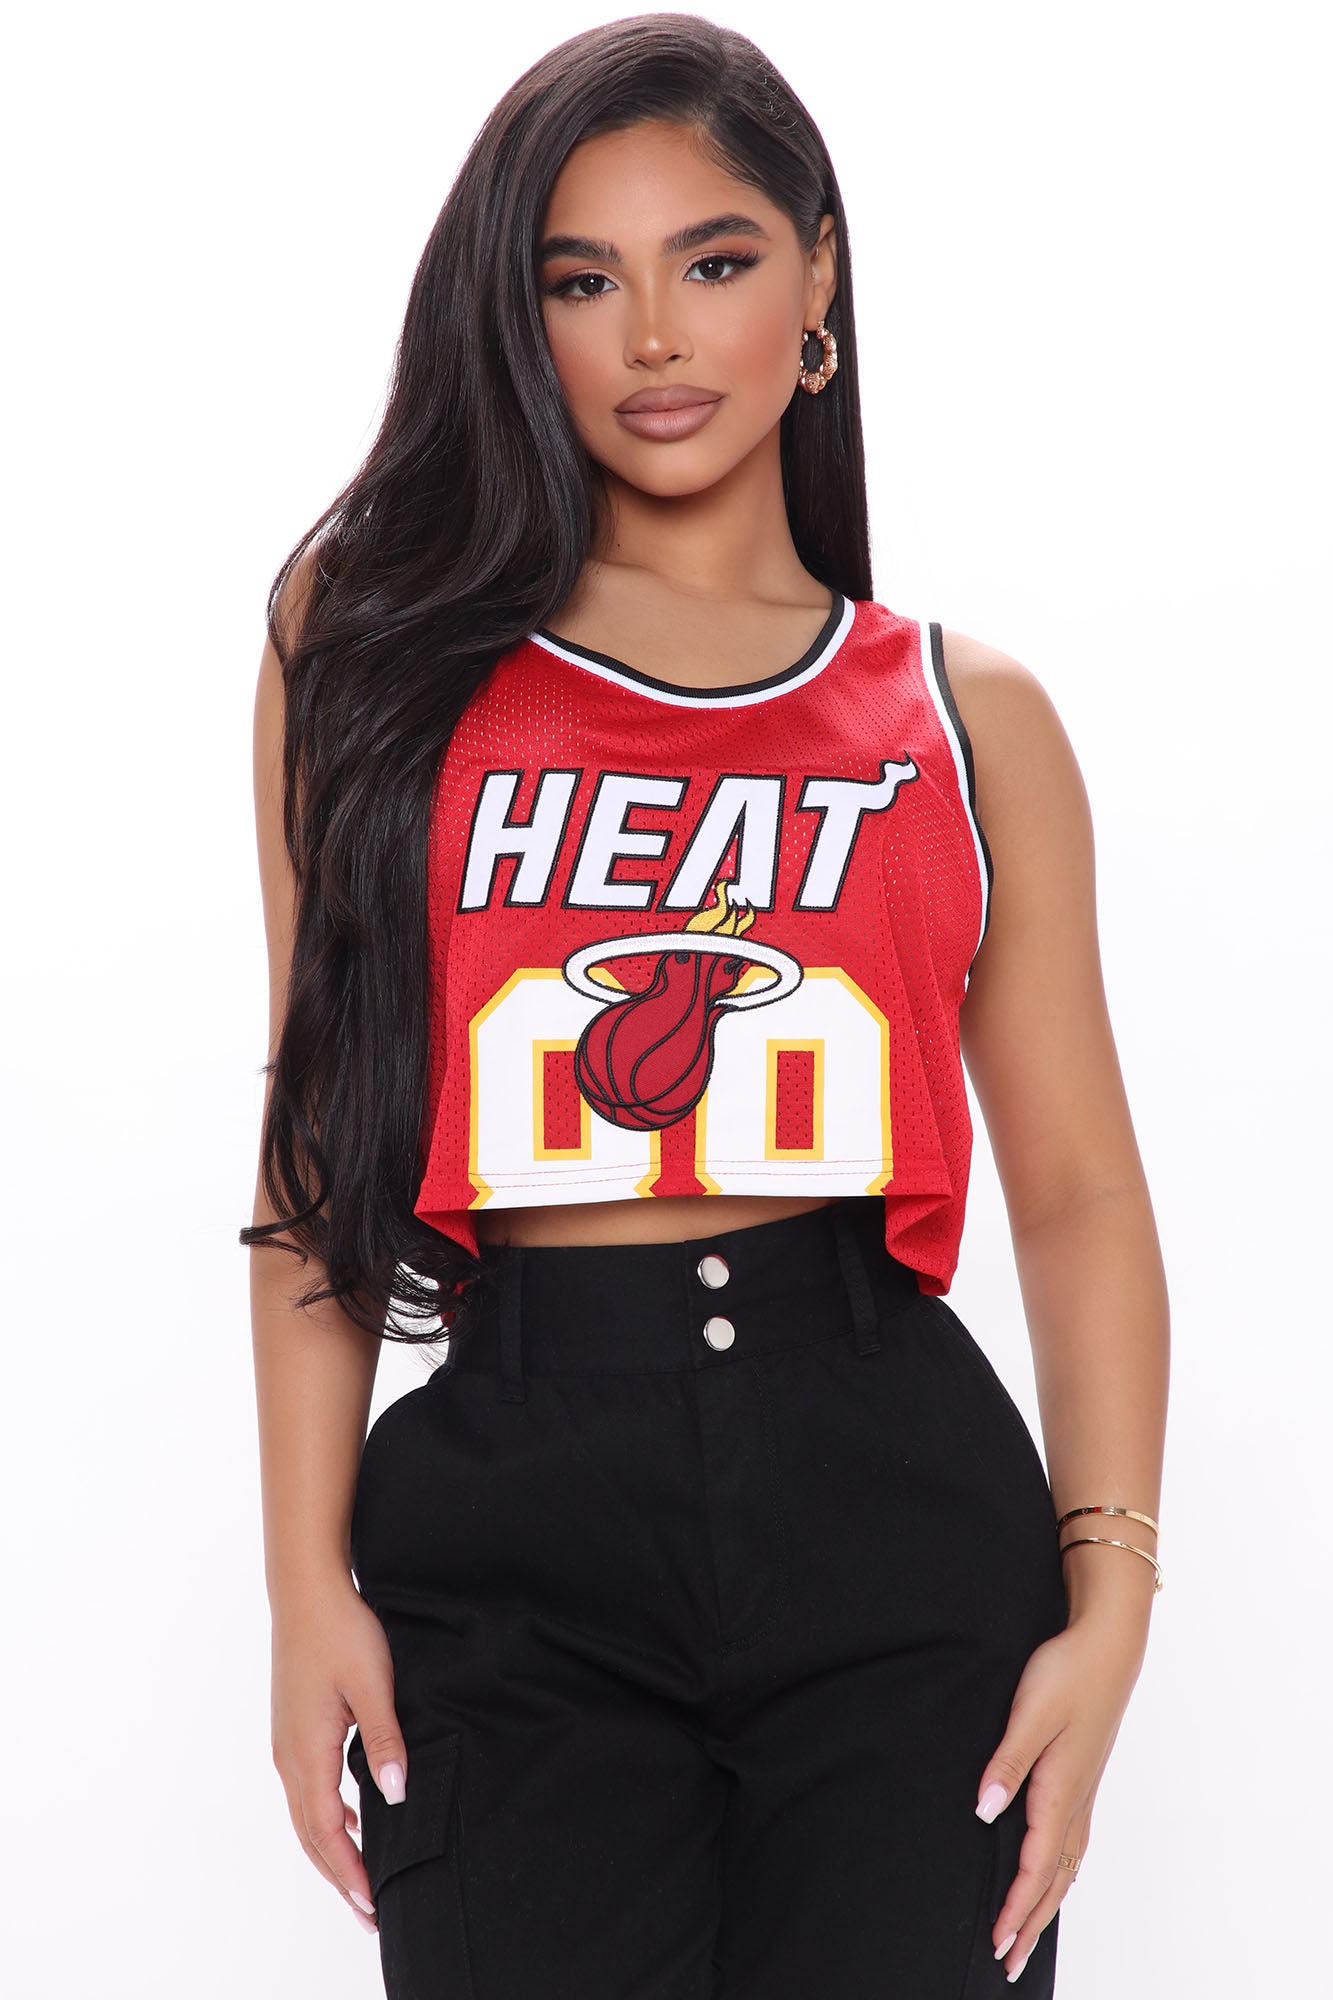 Miami Heat Women's Apparel, Heat Ladies Jerseys, Gifts for her, Clothing